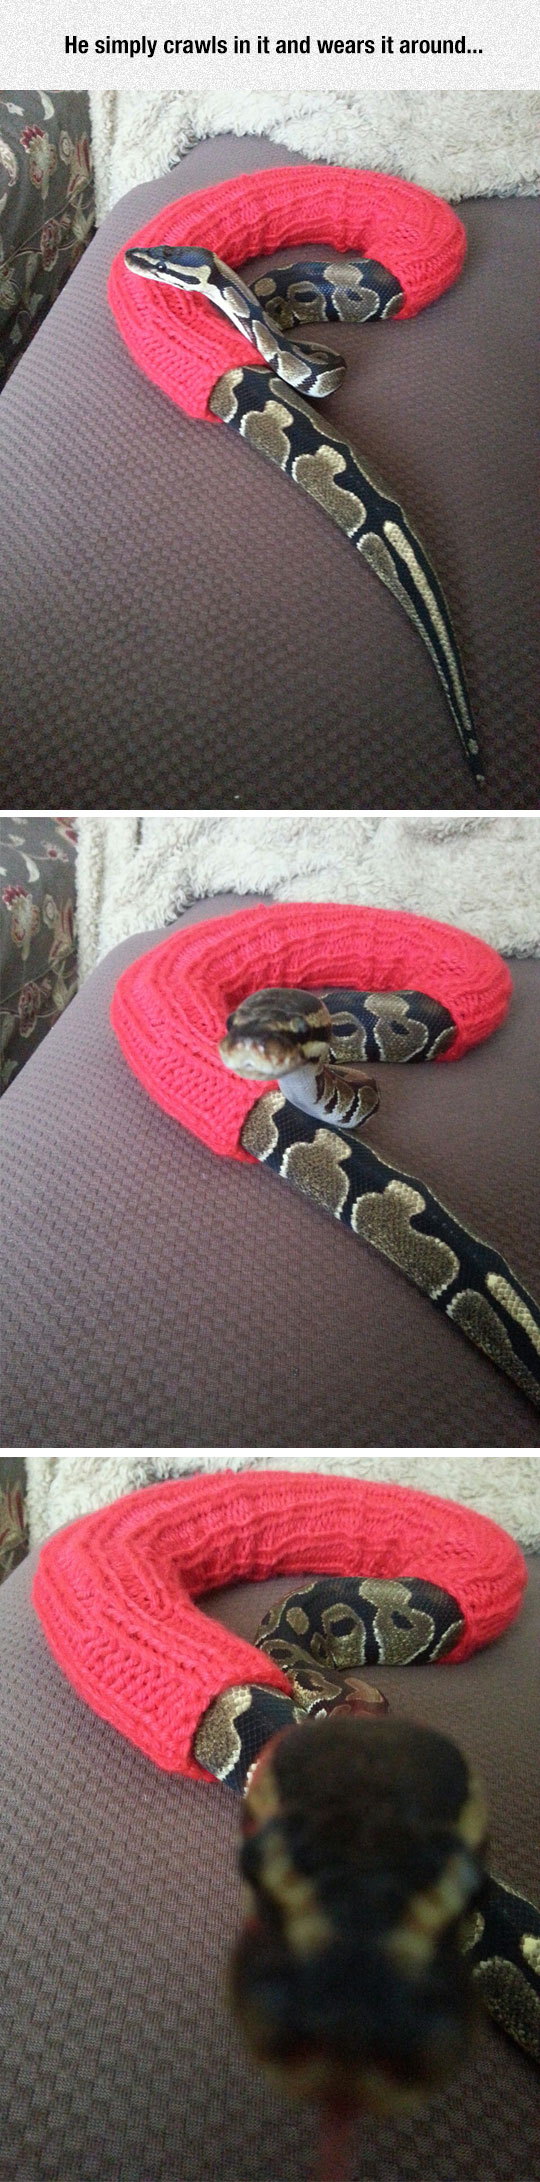 funny-snake-sweater-scary